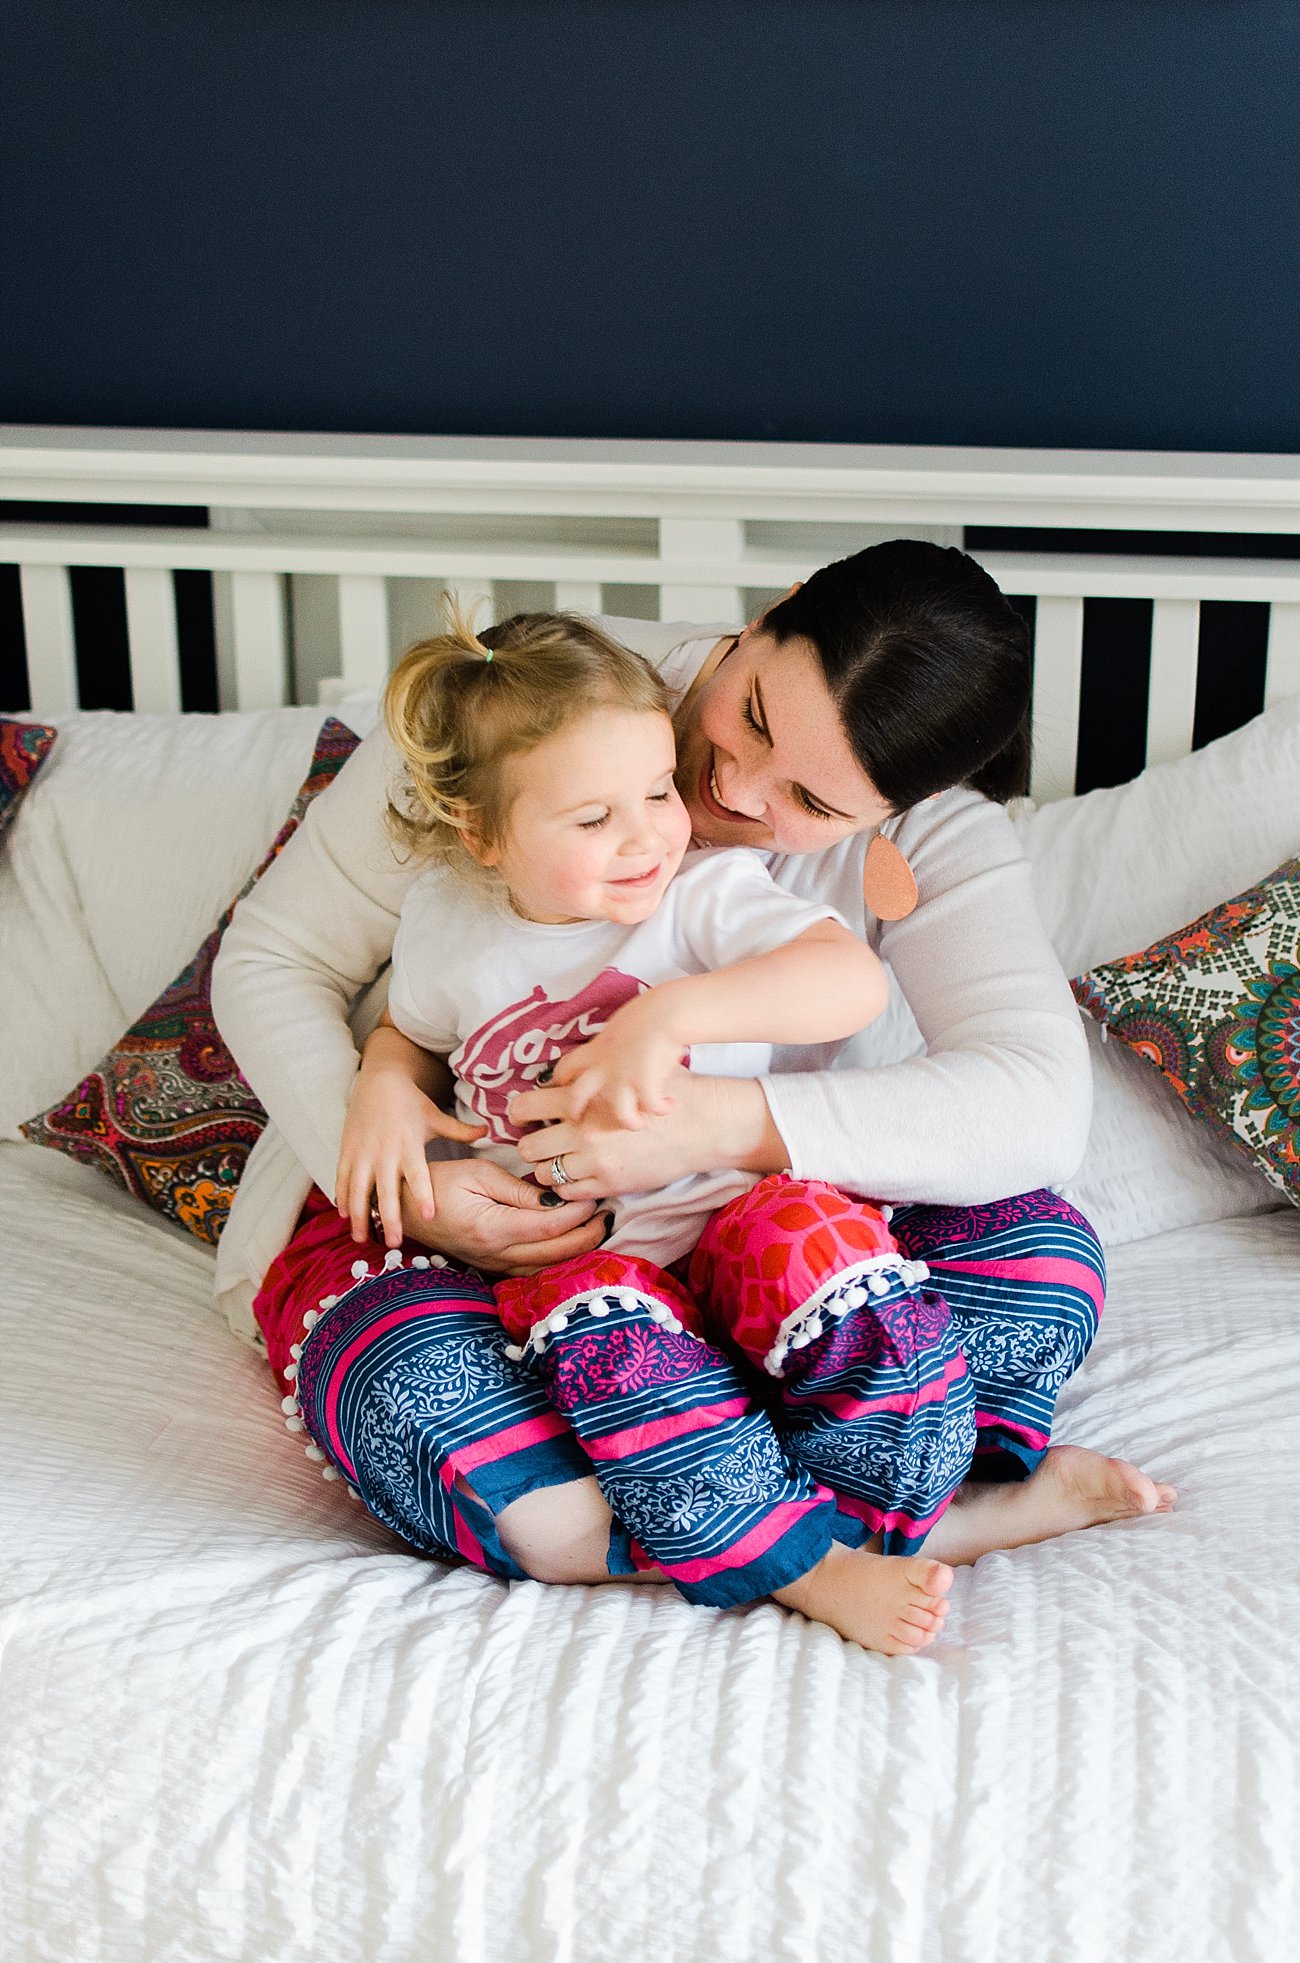 Sudara Goods Mommy & Me Punjammies - Ethical Fashion, Ethically Made Loungewear (2)